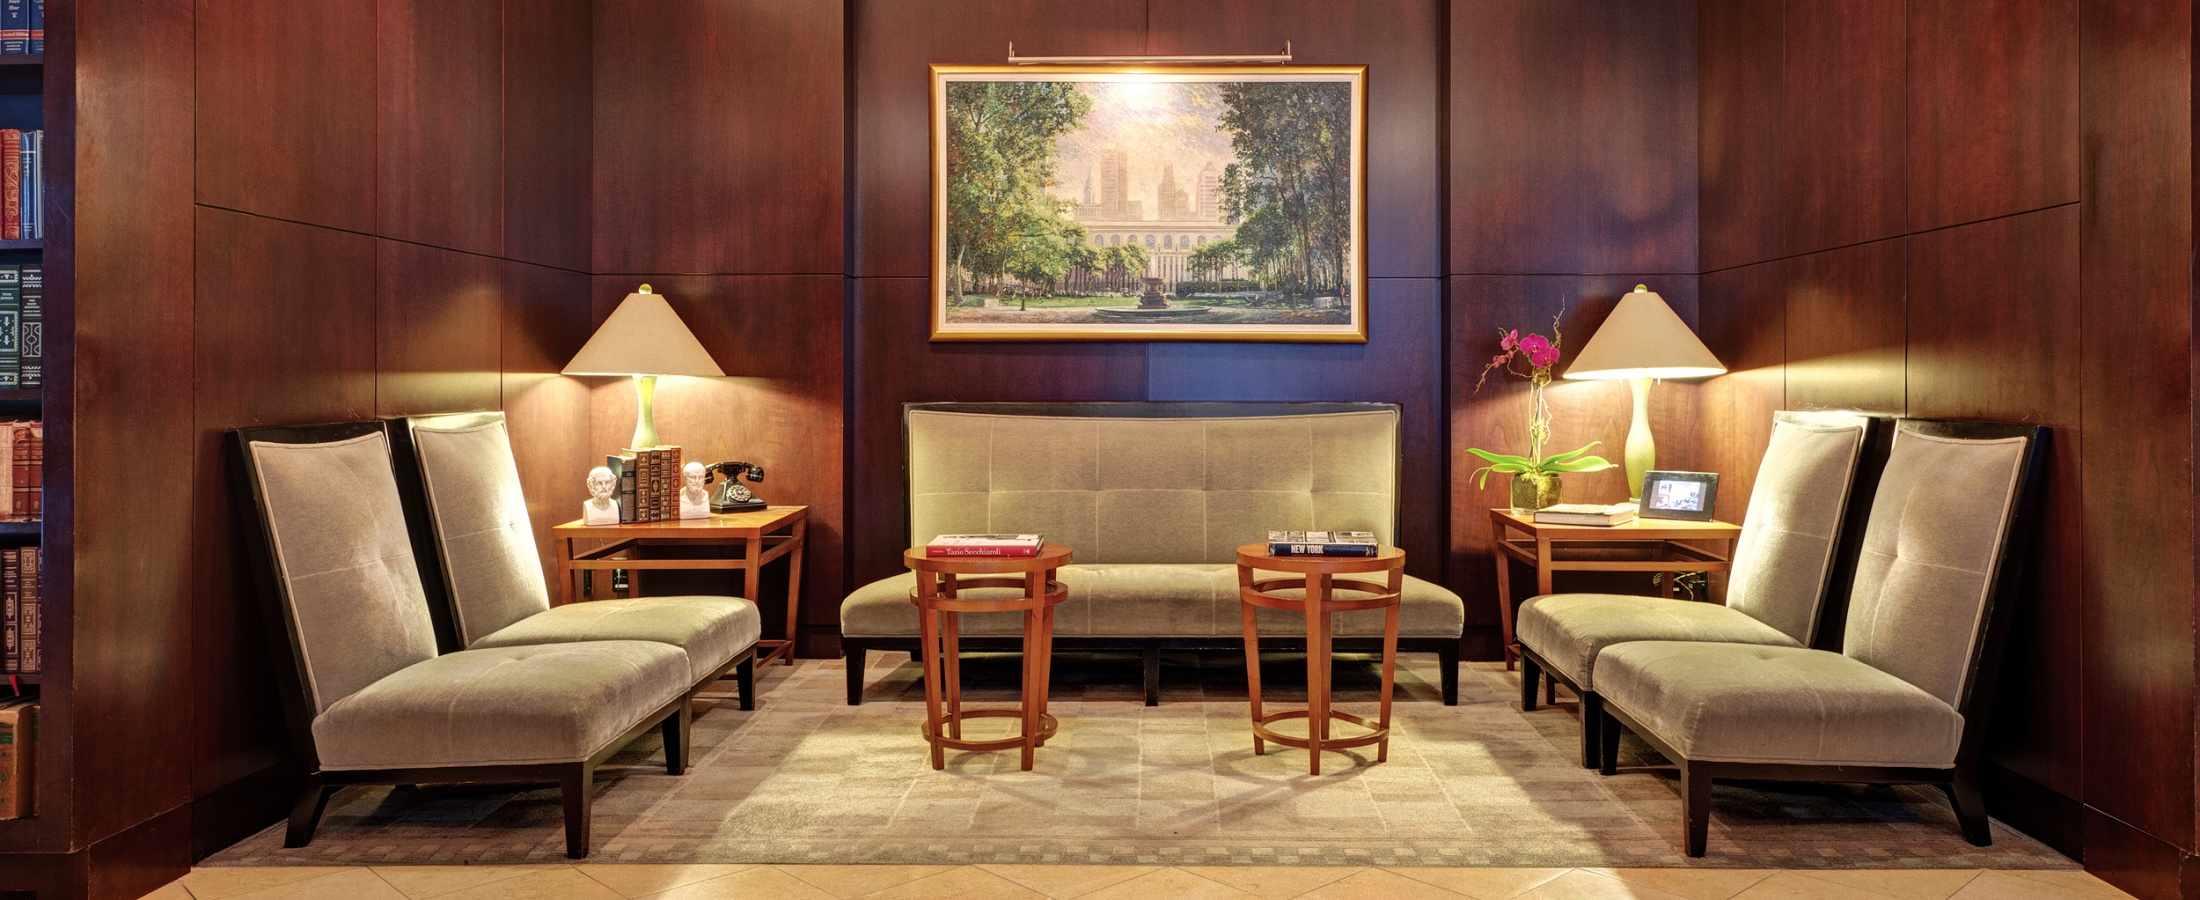 Library Hotel New York City - Lounge